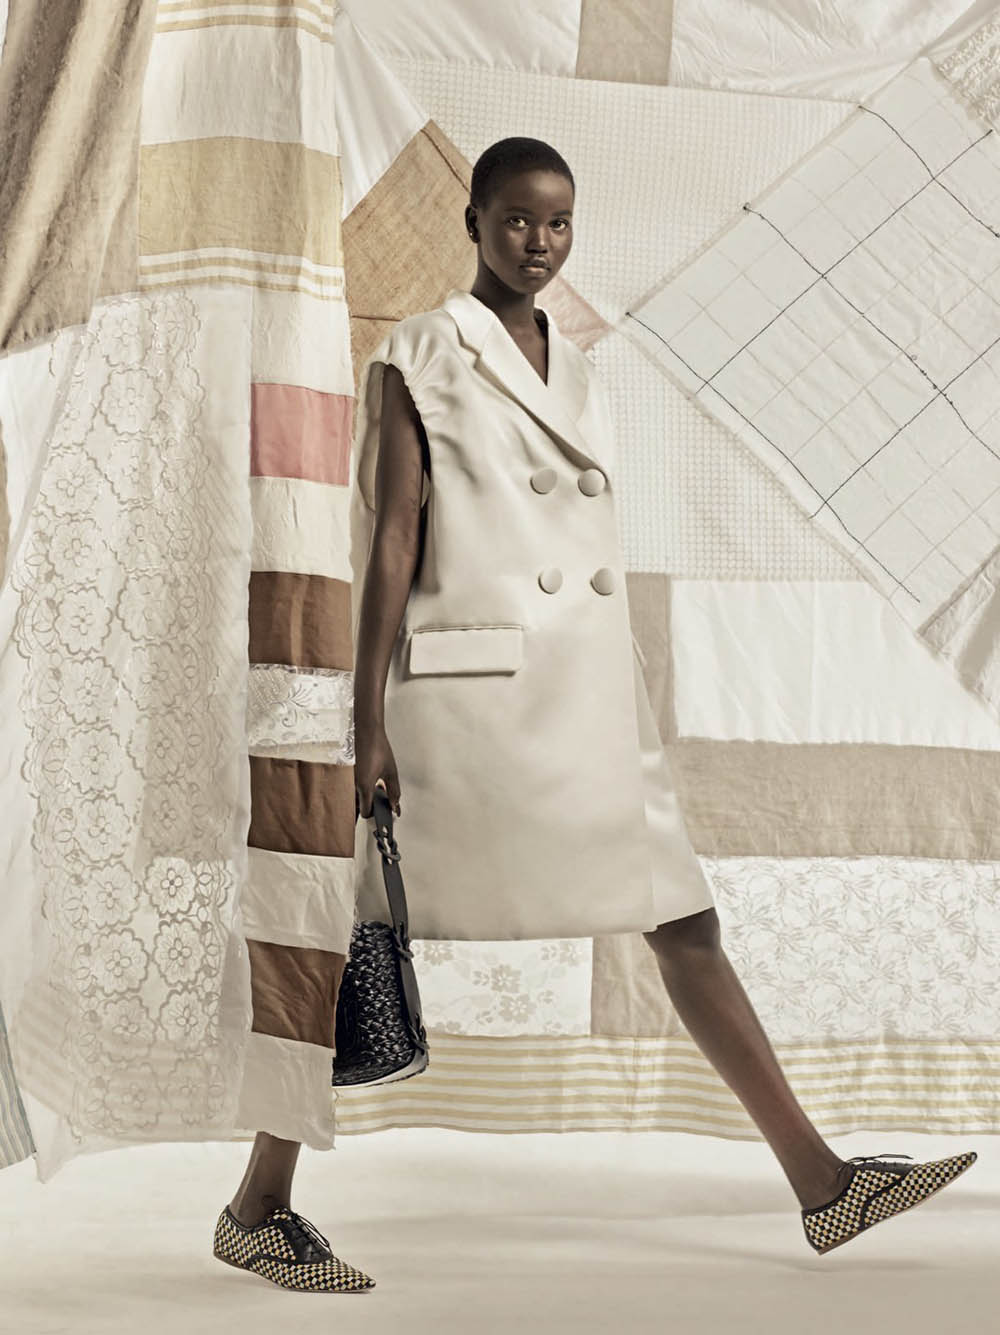 Adut Akech and Rianne van Rompaey by Craig McDean for British Vogue February 2020